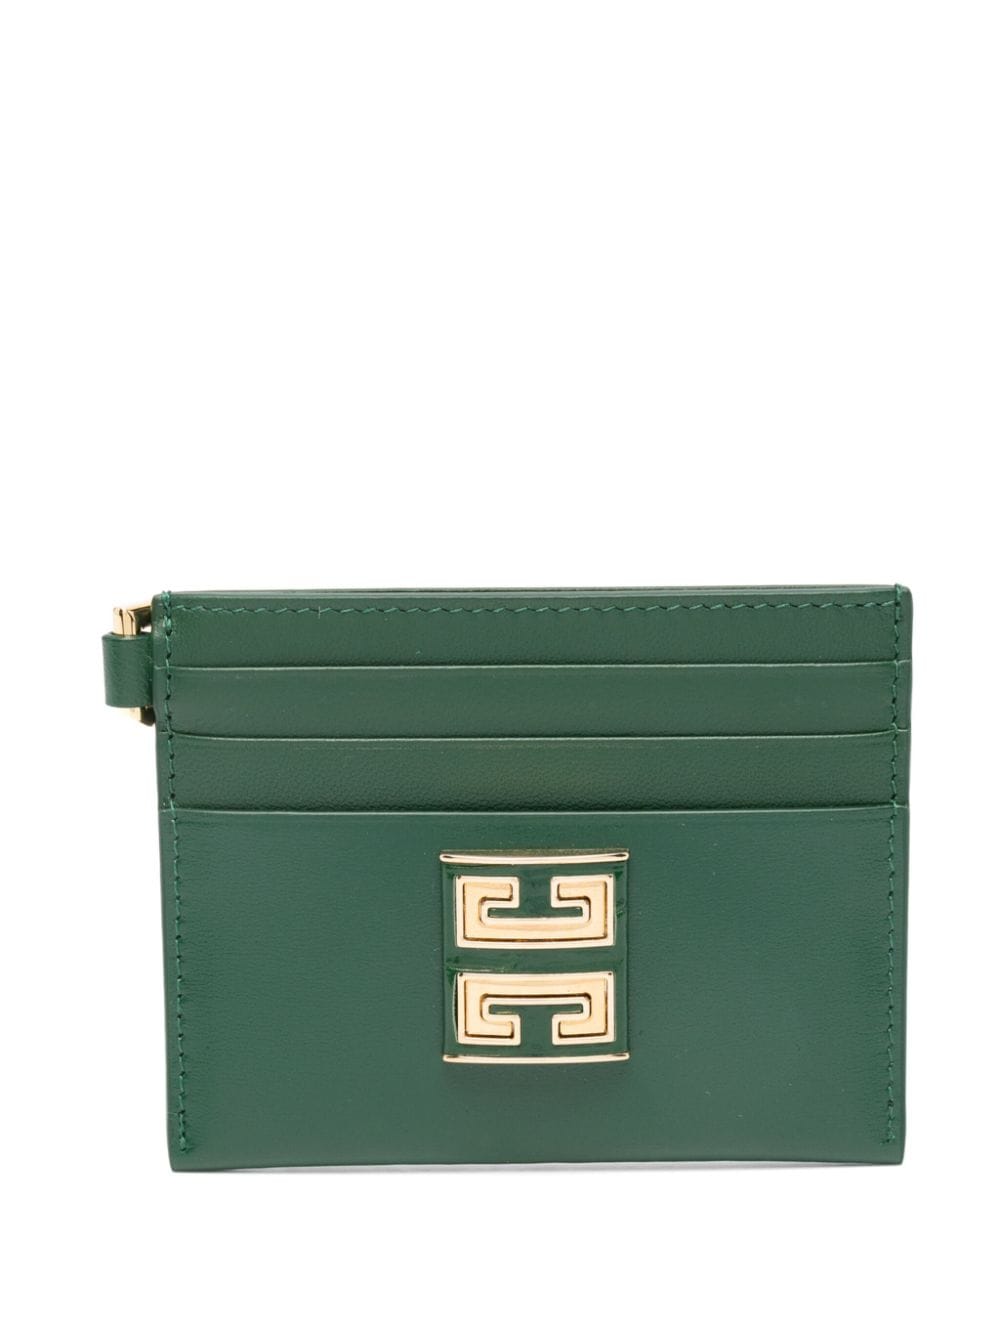 Givenchy 4G-motif leather wallet - Green von Givenchy